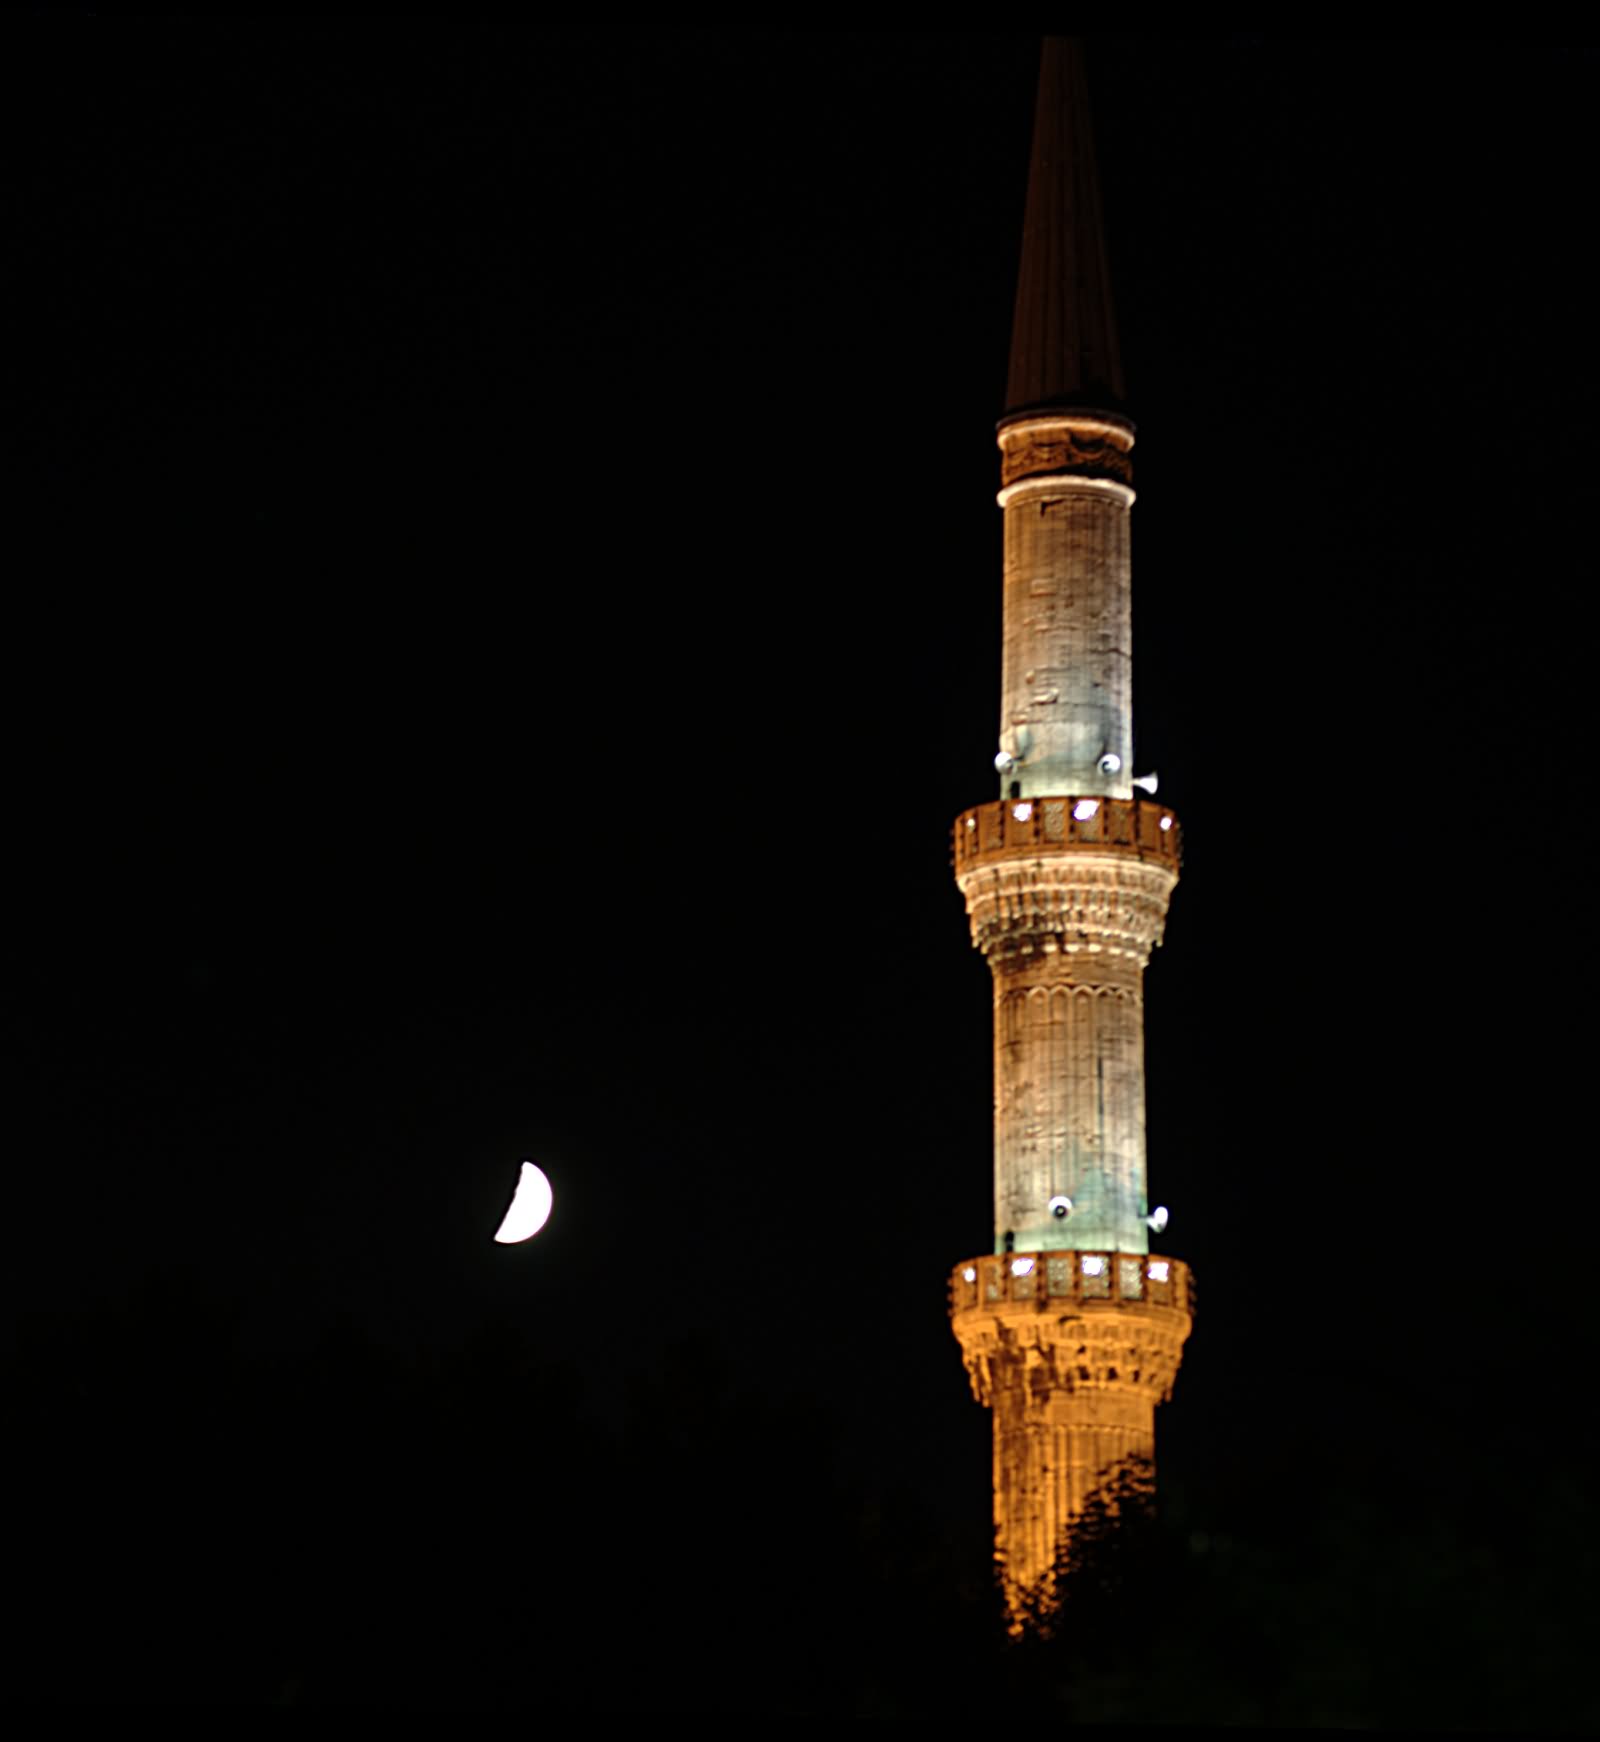 Blue Mosque Minaret At Night With Moon